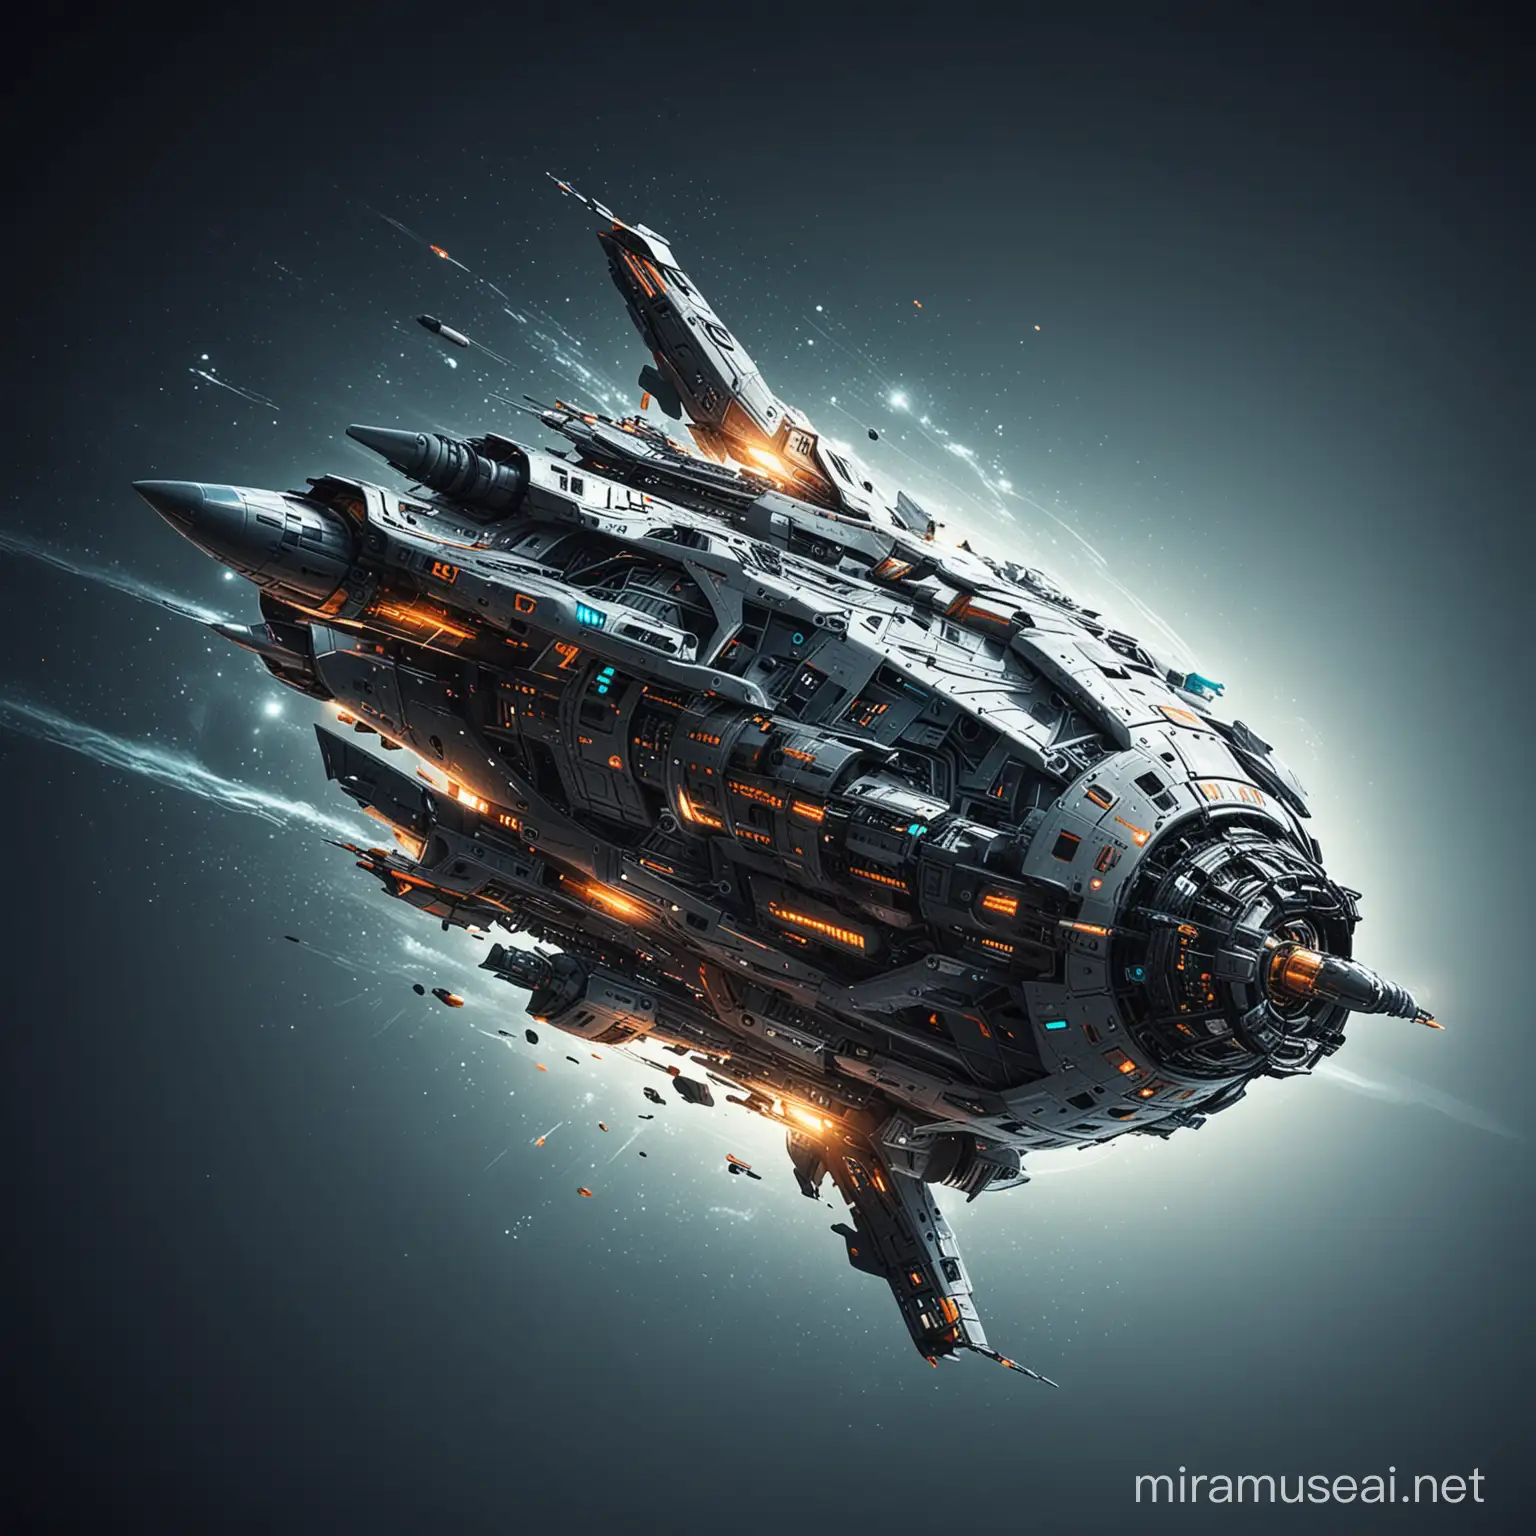 Futuristic Spaceship Concept Art Abstract Design with SciFi Elements